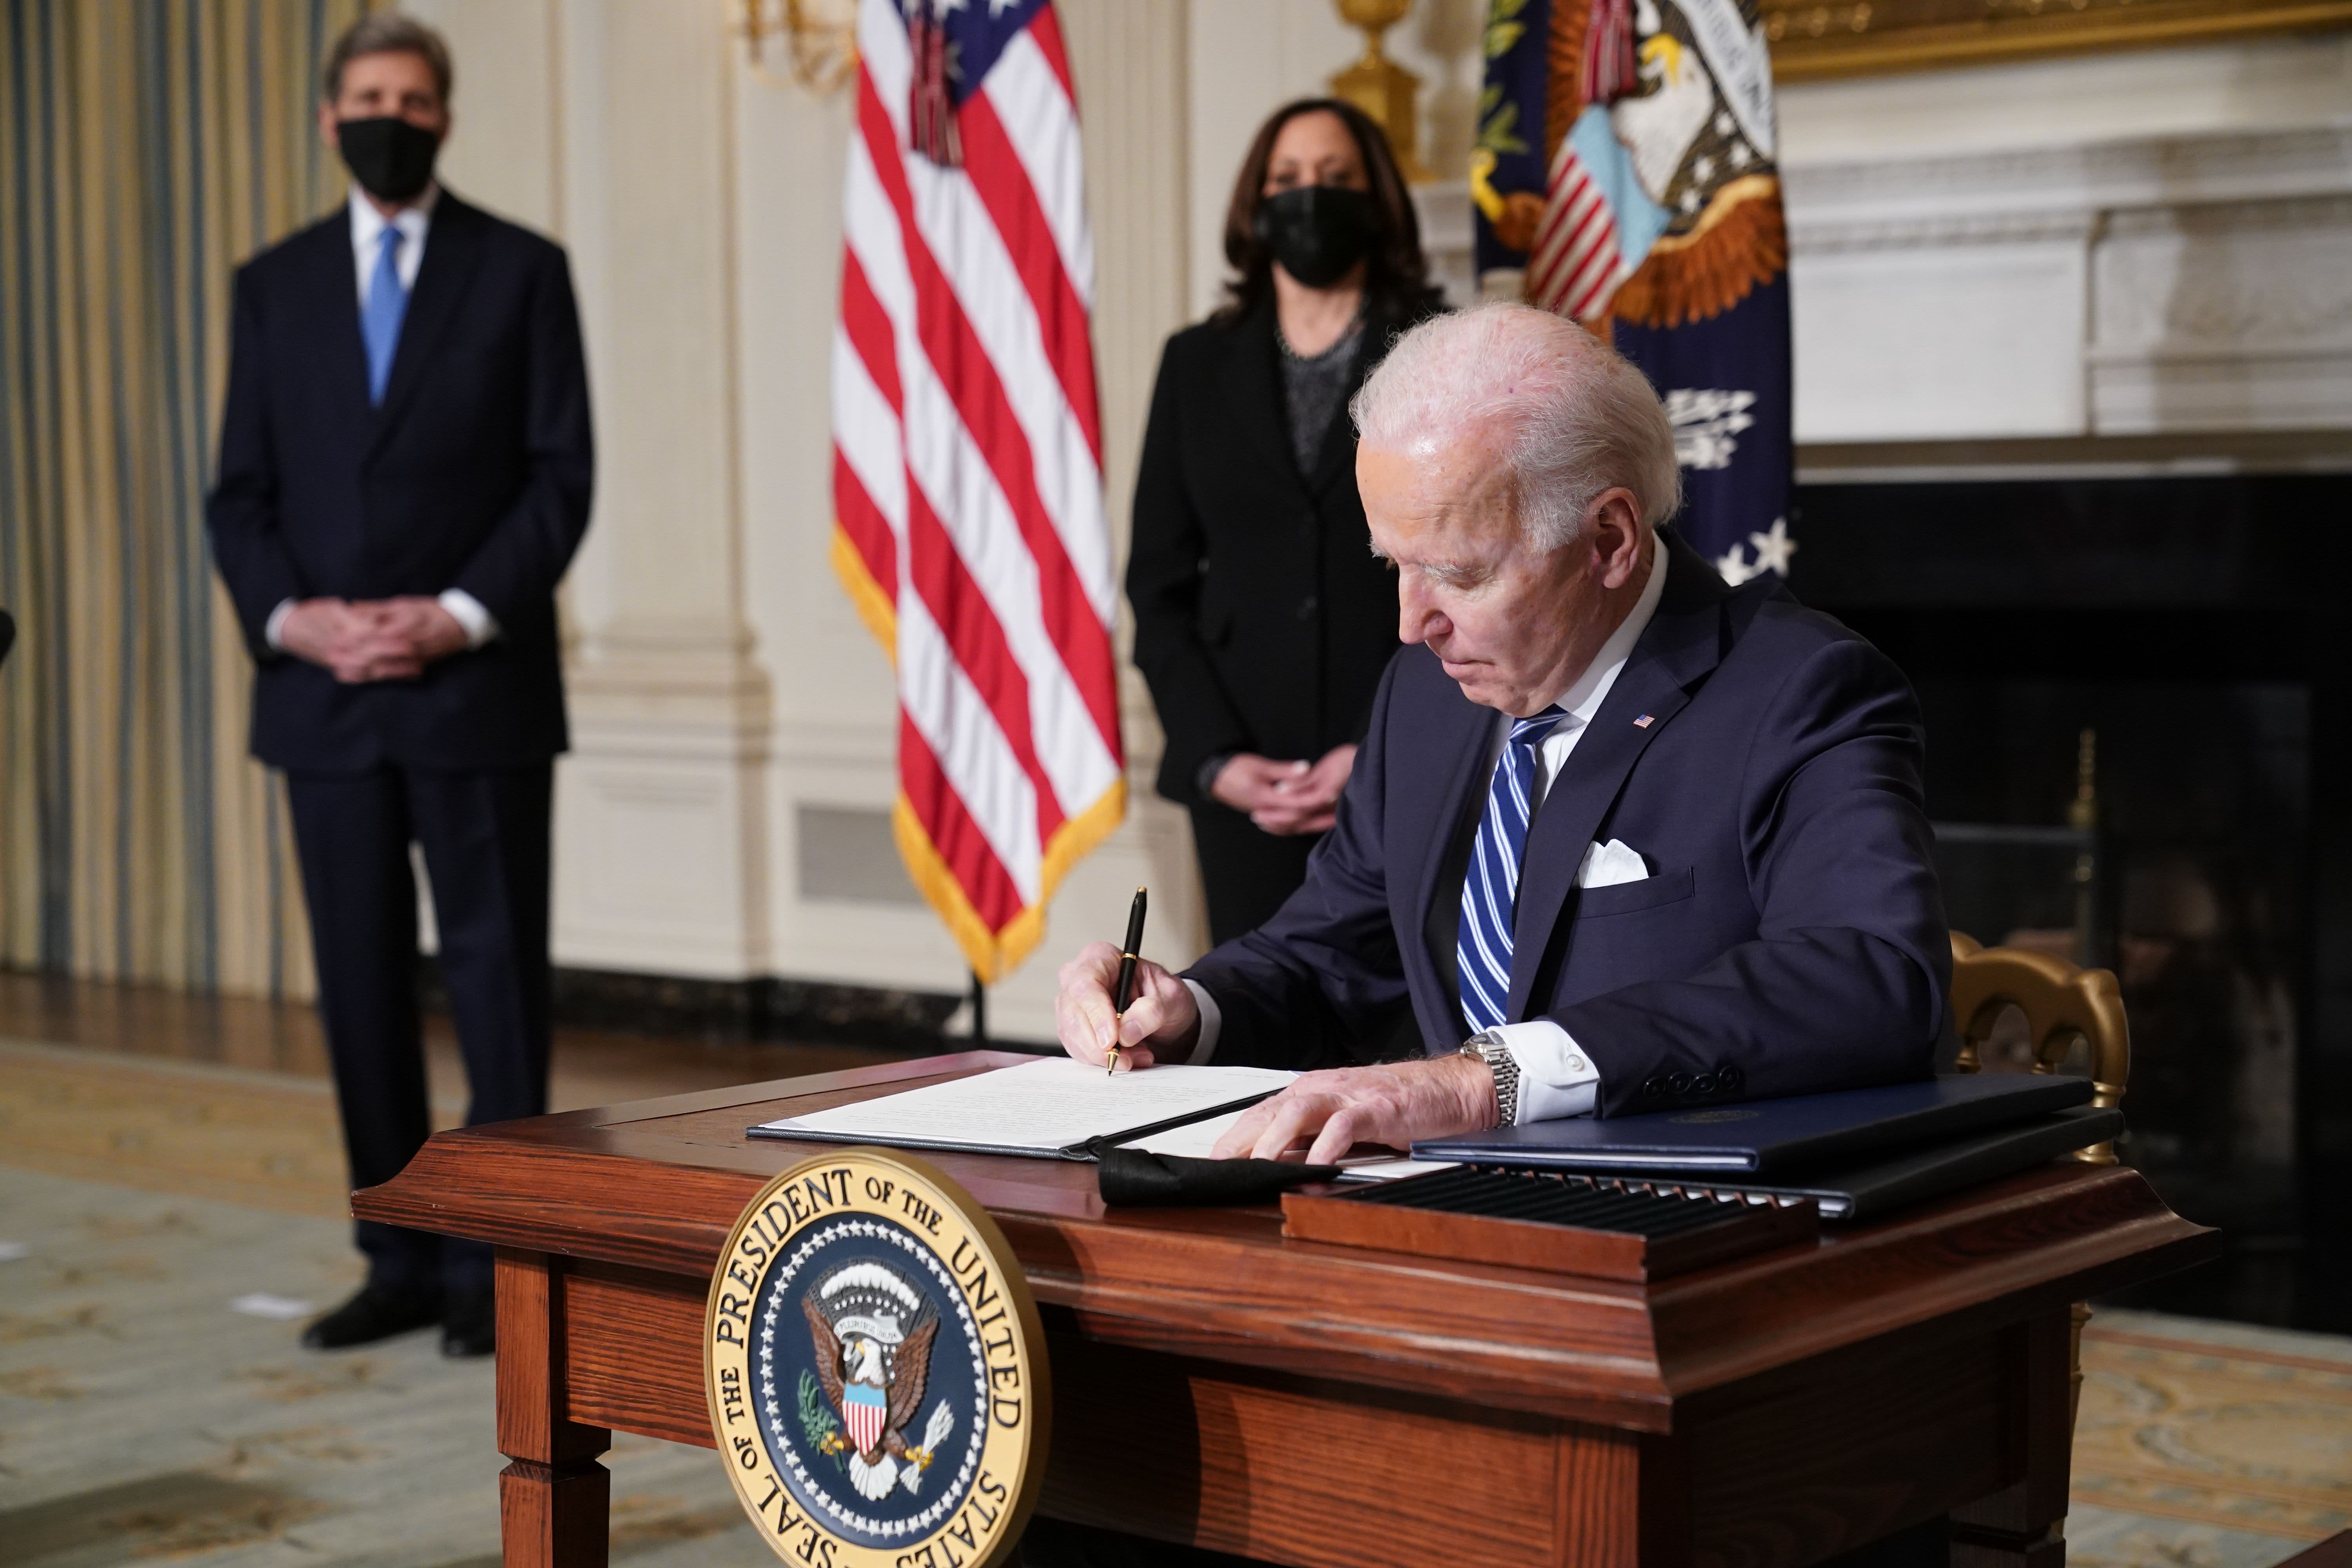 Here’s how Biden’s $2 trillion infrastructure plan addresses climate change